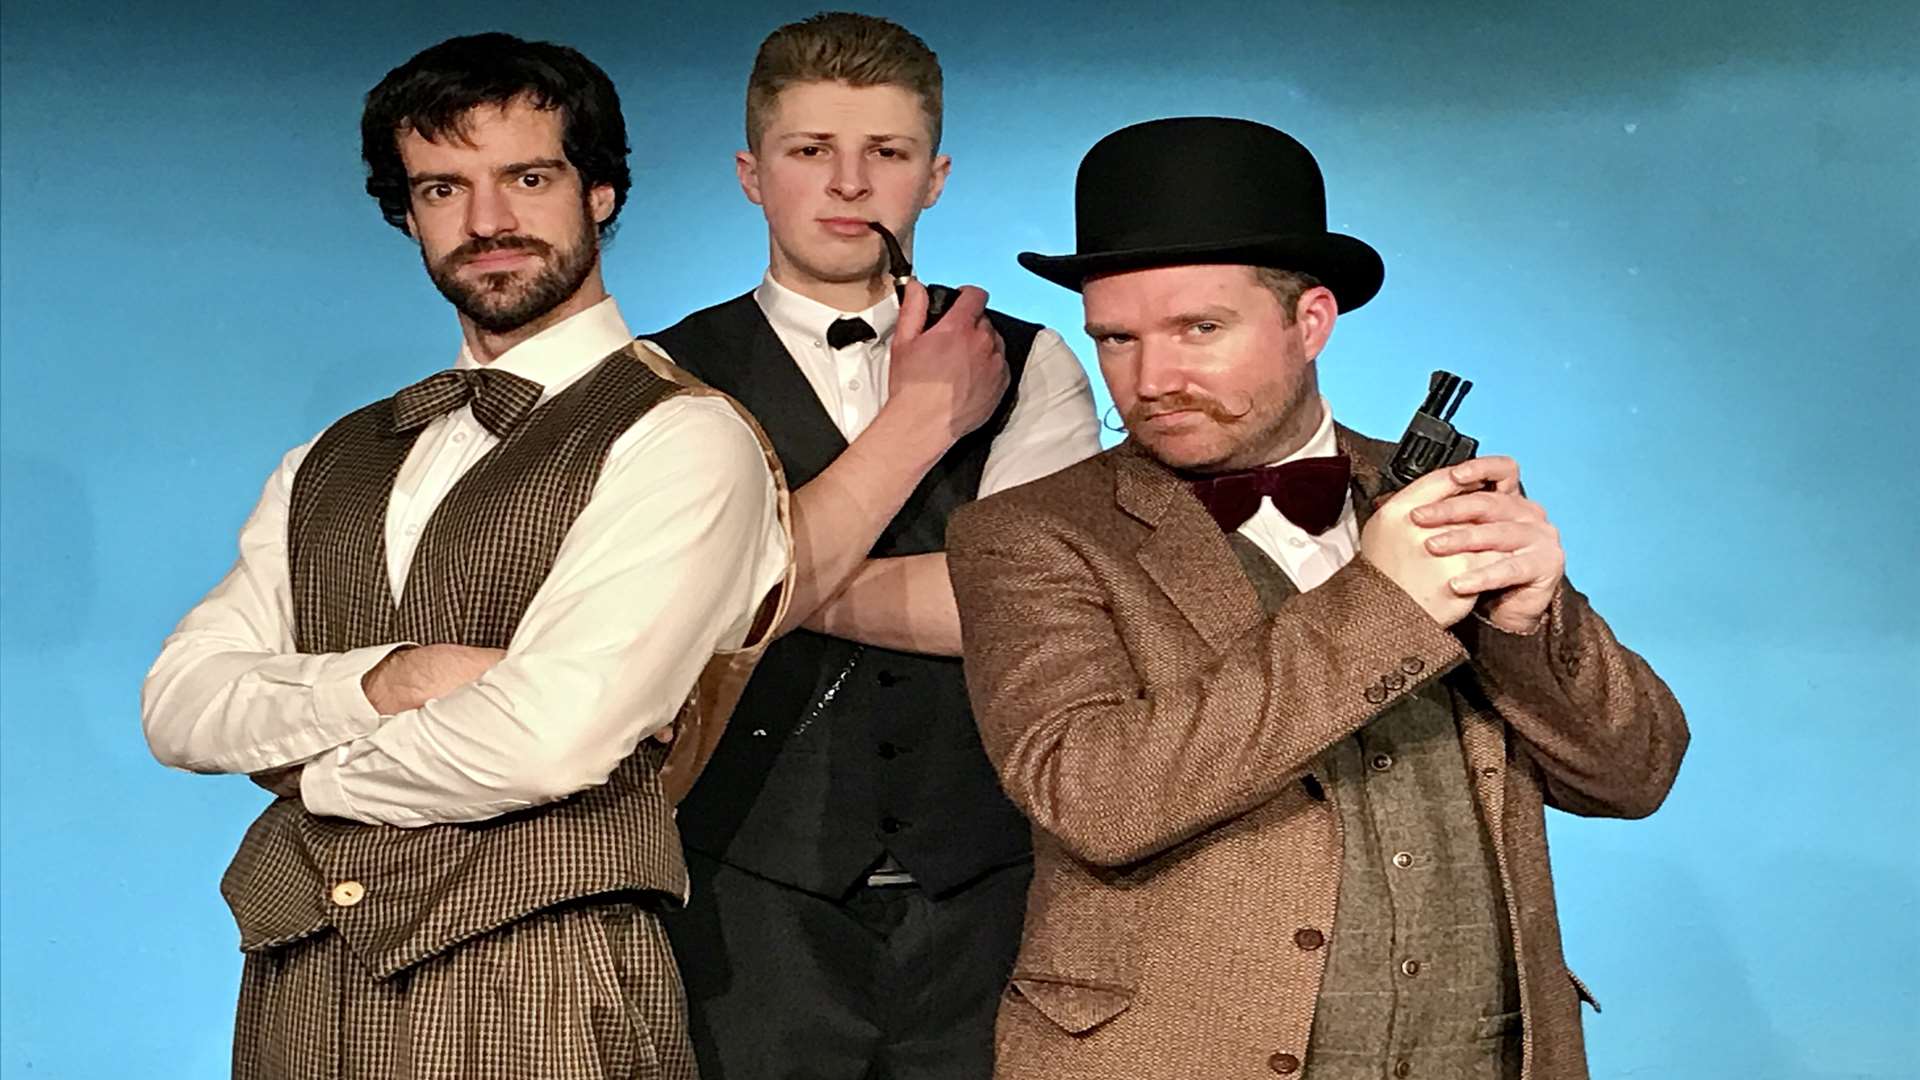 Luke Bailey, Ryan Caston and Mike Gentry in the Hound of the Baskervilles